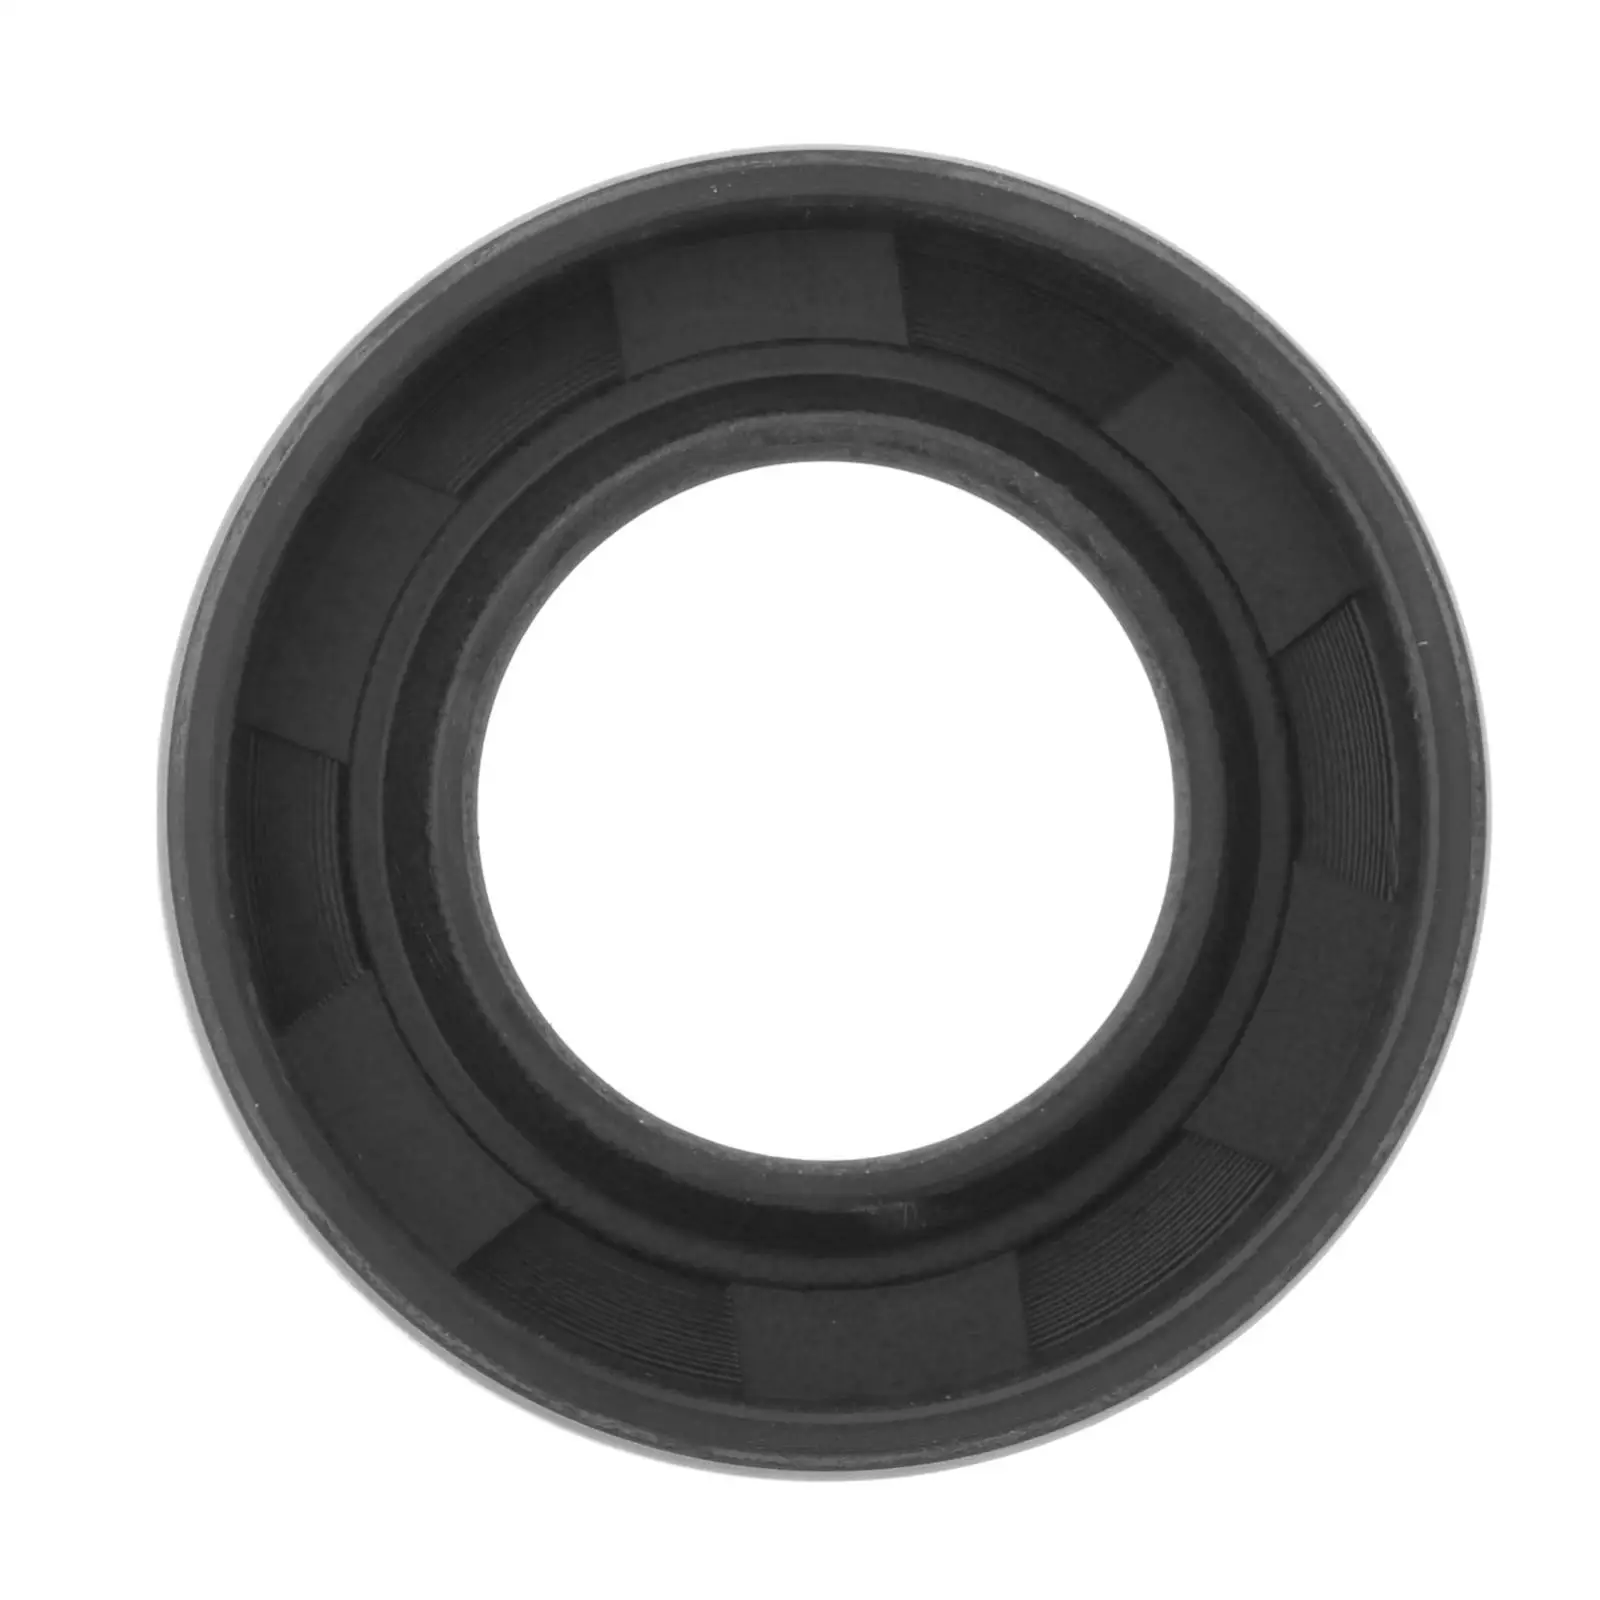 Oil Seal Replaces 93106-18M01 Fit for Yamaha Outboard Motor 60HP 70HP 2 Stroke 3cyl Outboard Engine